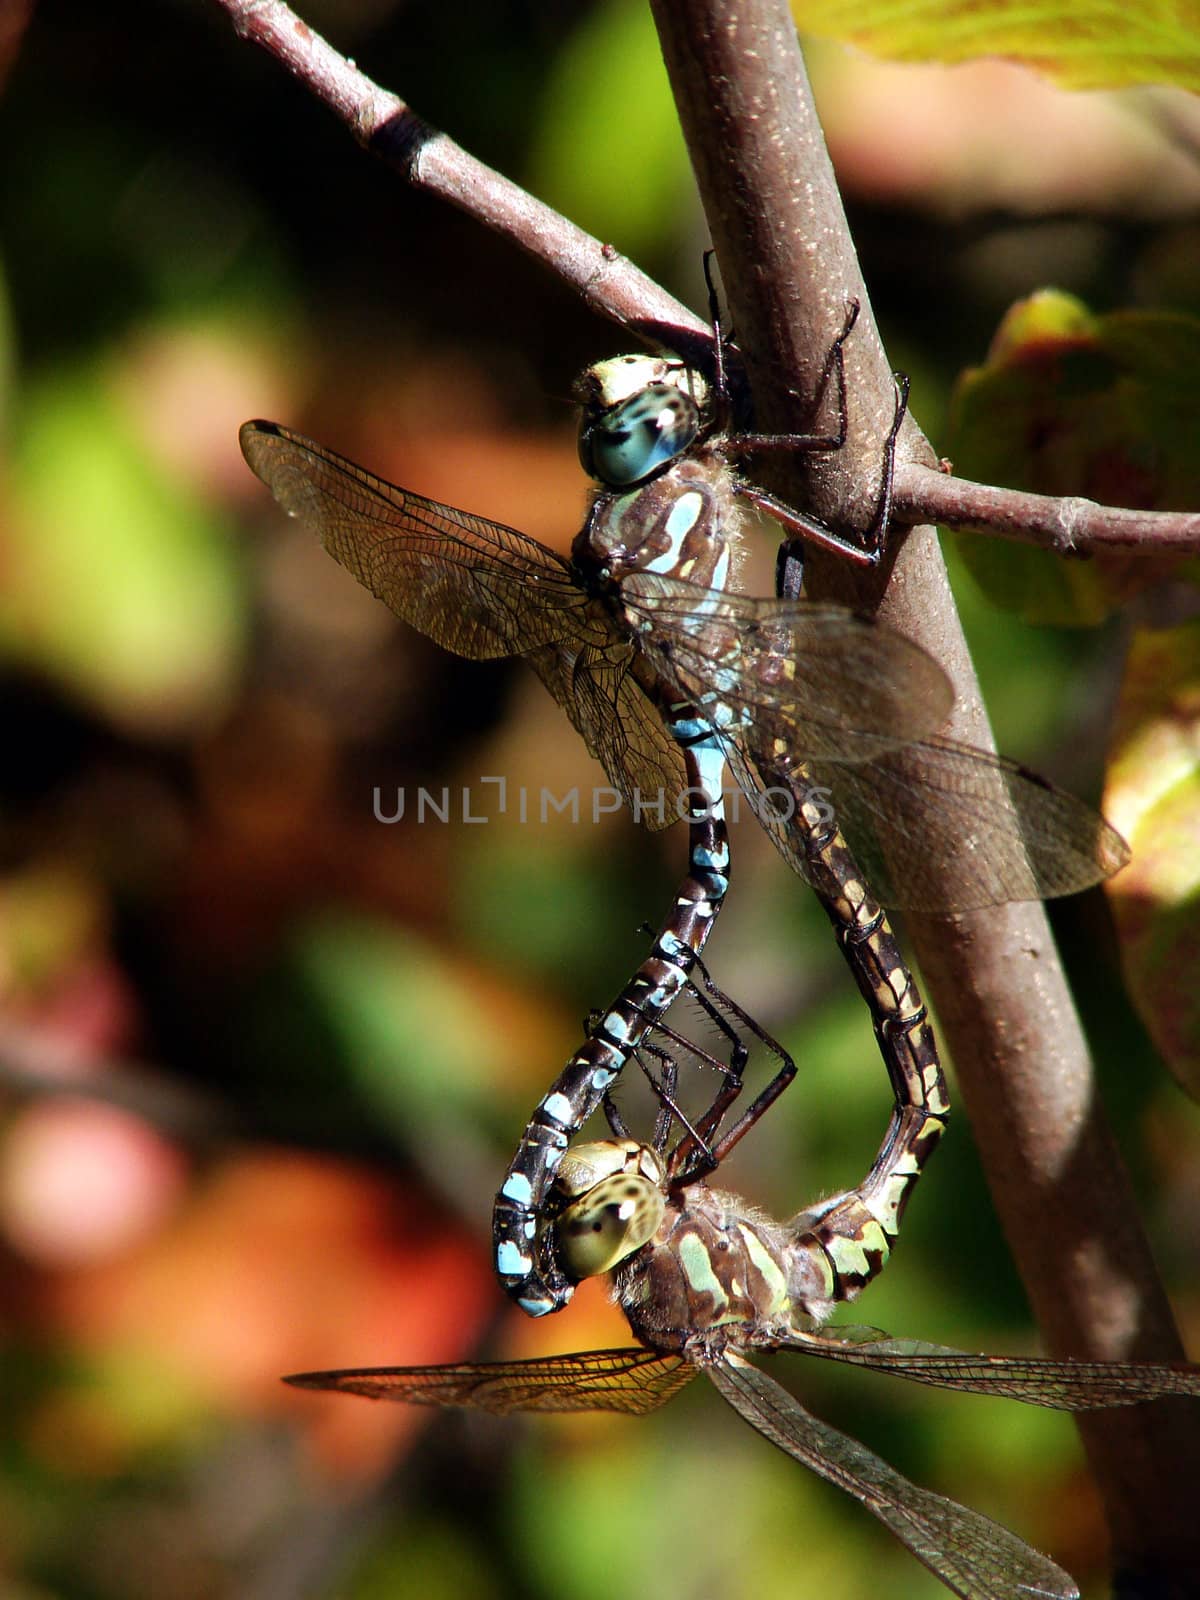 Couple of dragonfly mating on a branch